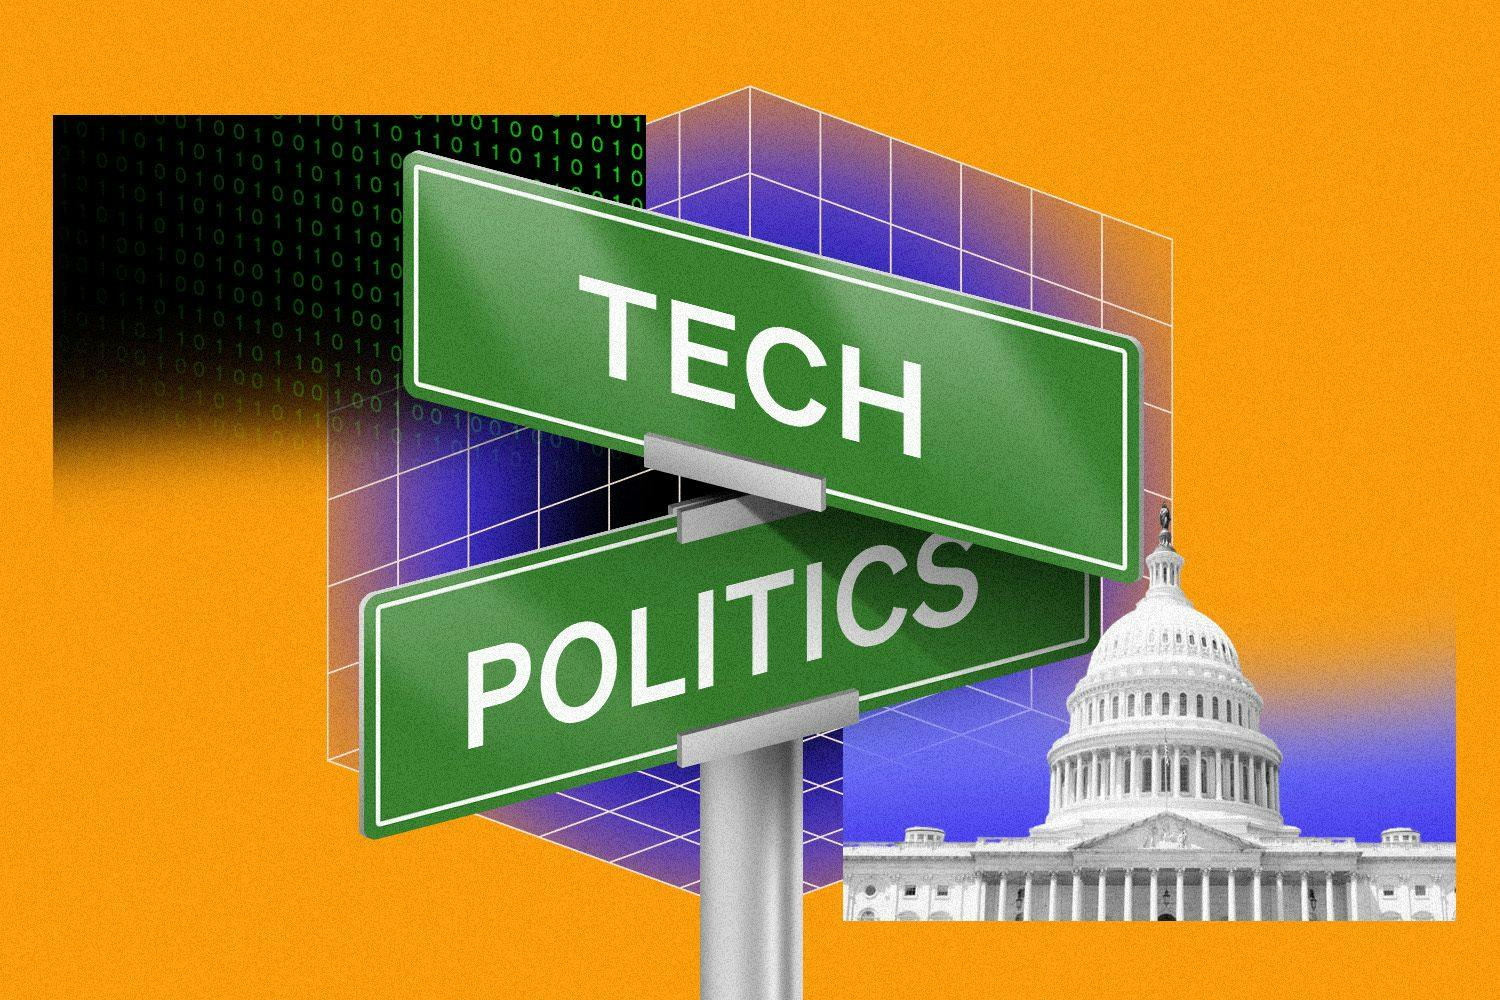 Street signs show the corner of tech and politics.